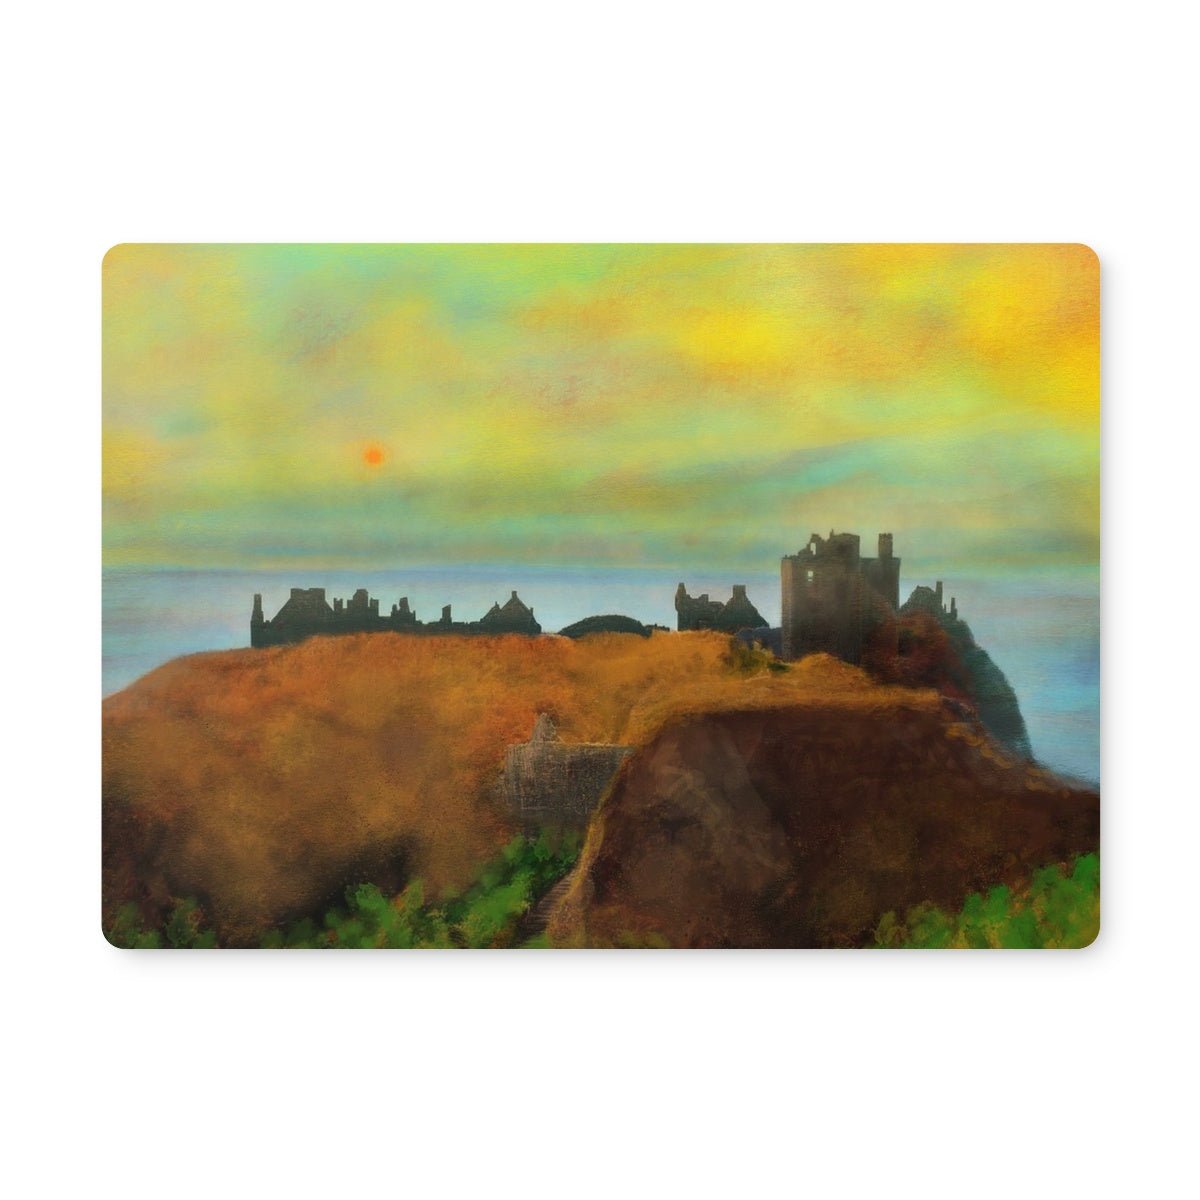 Dunnottar Castle Dusk Art Gifts Placemat-Placemats-Historic & Iconic Scotland Art Gallery-Single Placemat-Paintings, Prints, Homeware, Art Gifts From Scotland By Scottish Artist Kevin Hunter